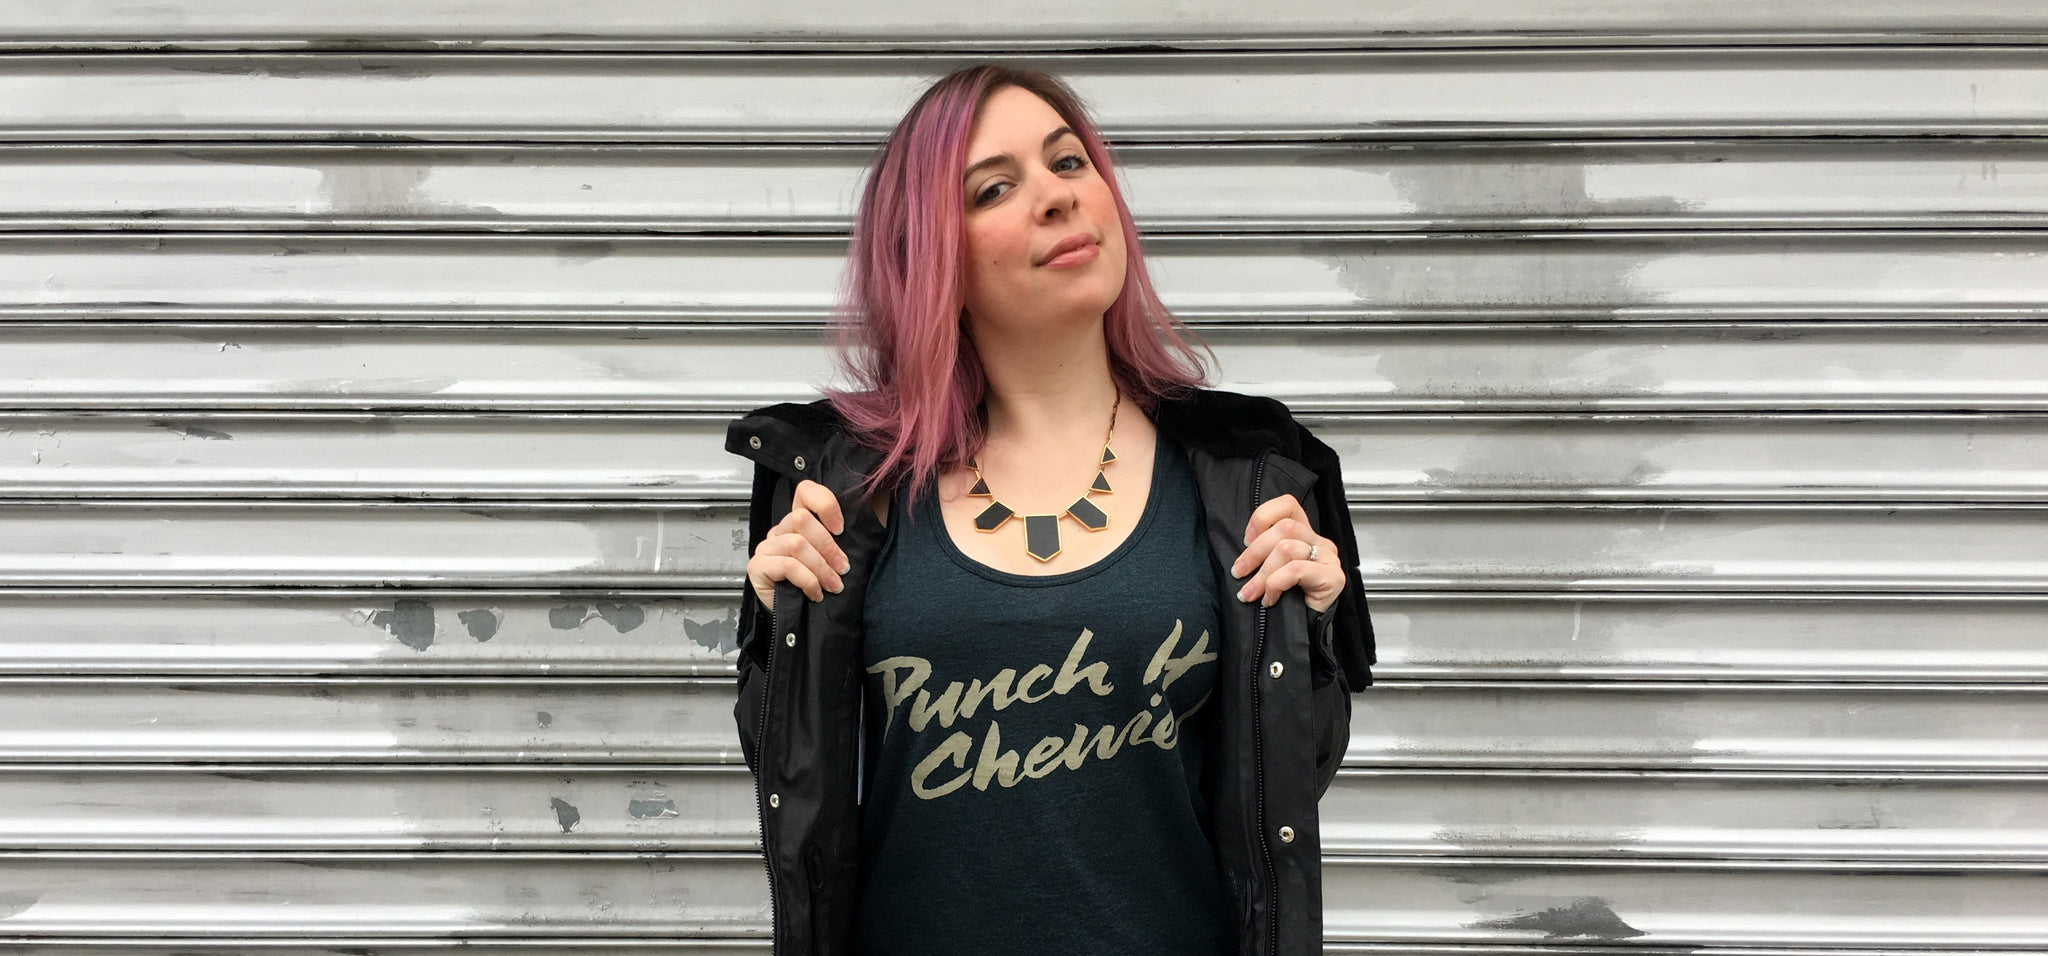 February's Shirt of the Month | Punch It, Chewie